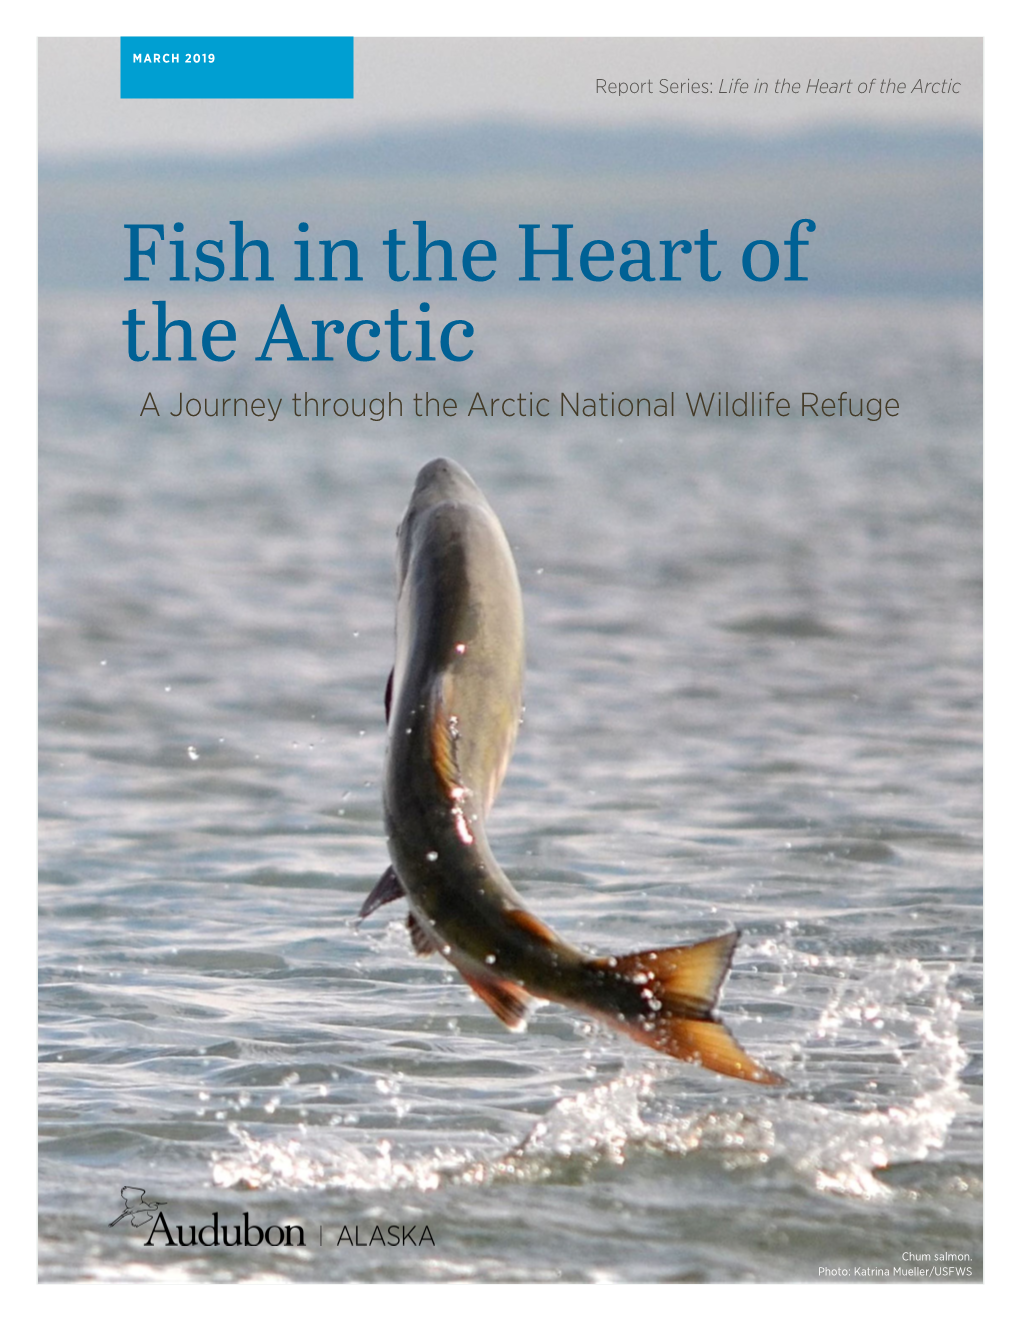 Fish in the Heart of the Arctic: a Journey Through the Arctic National Wildlife Refuge